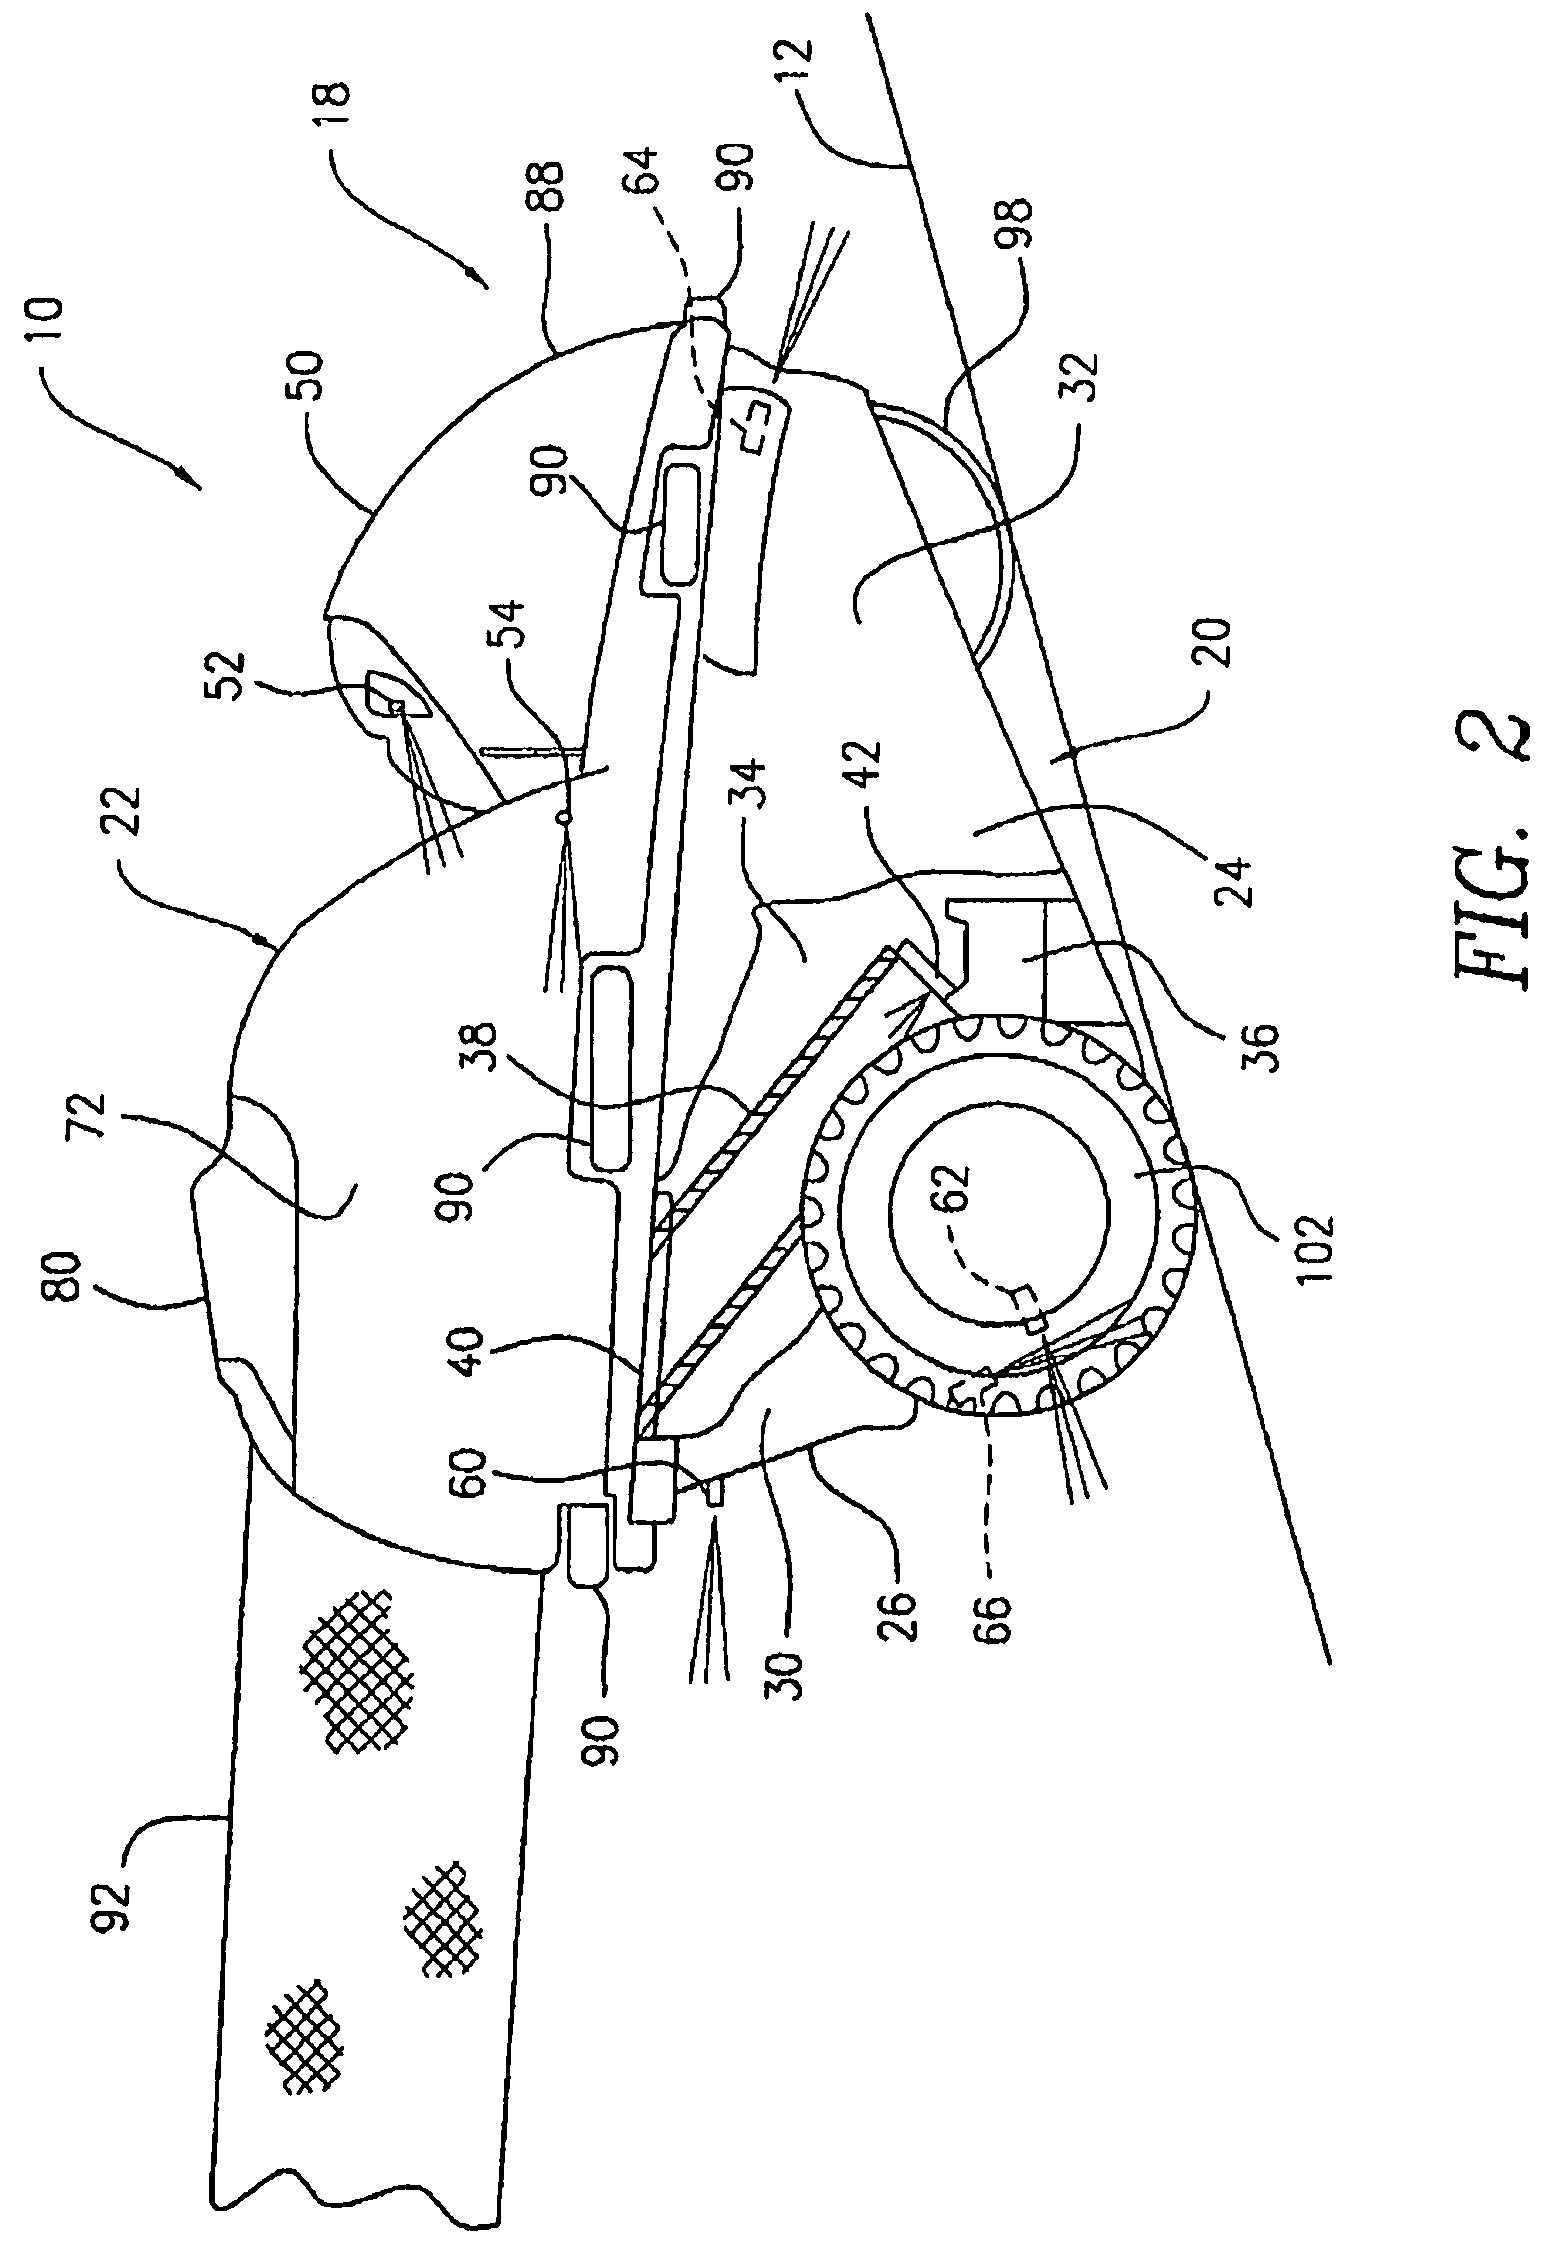 Fluid distribution system for a swimming pool cleaning apparatus